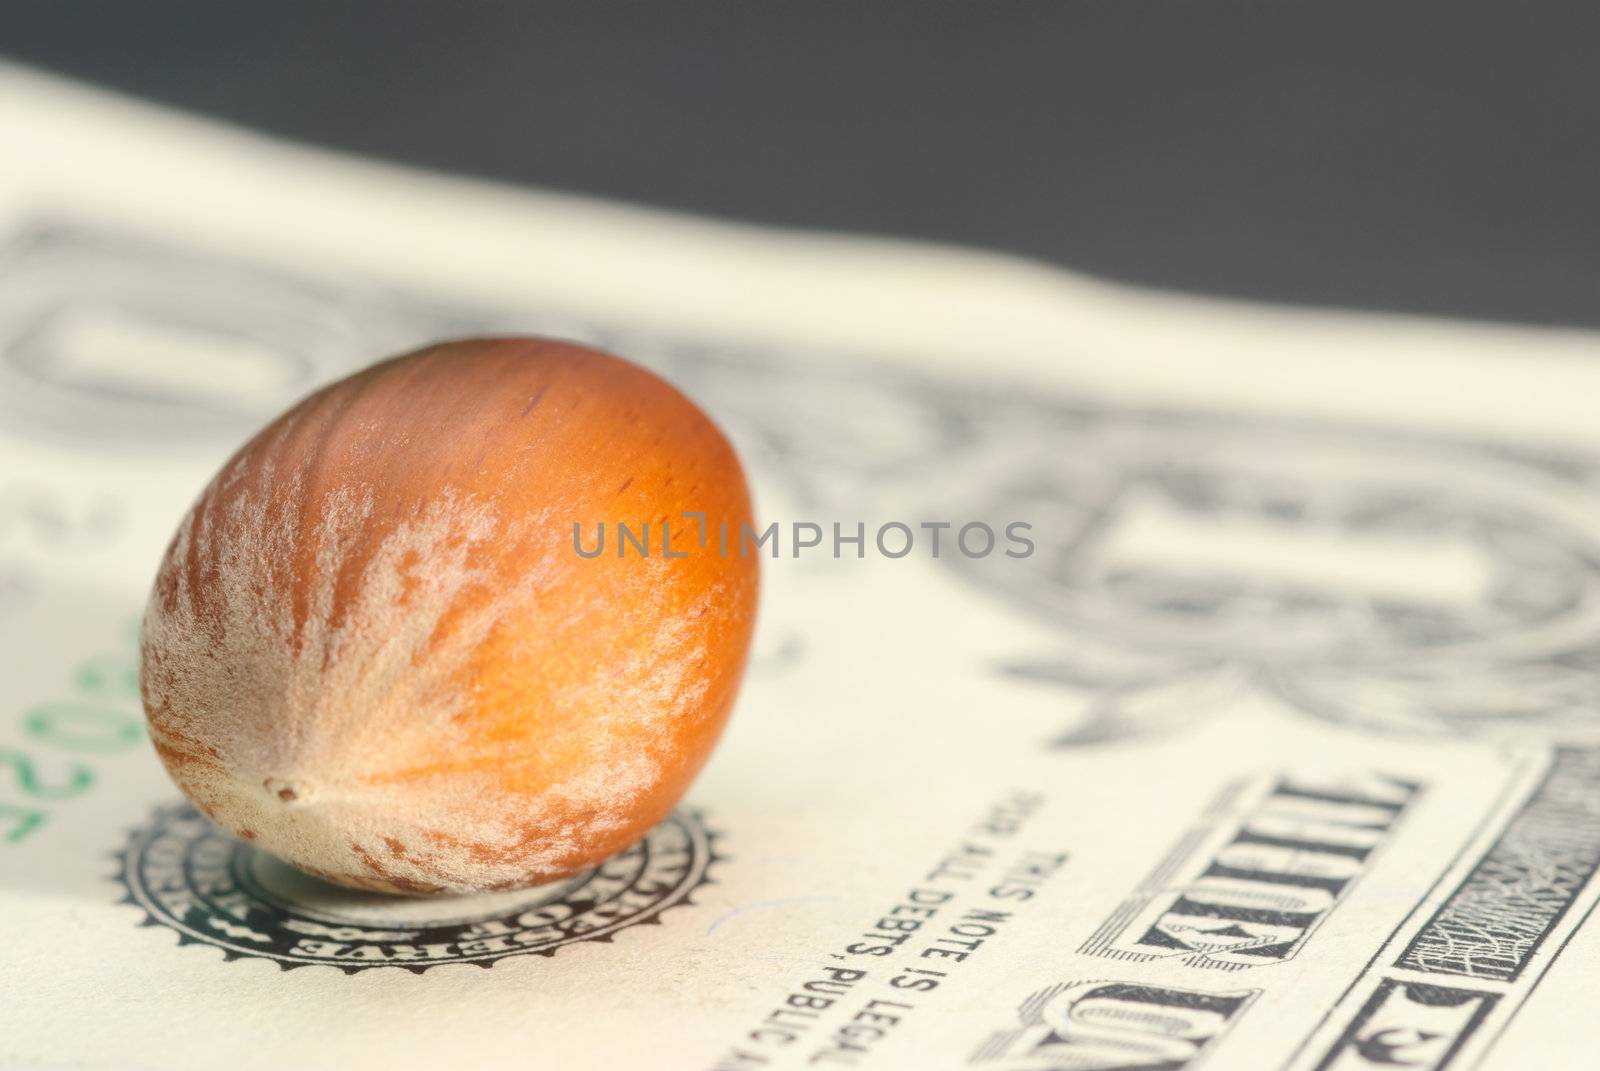 Hazelnut stands at the center of the paper dollar